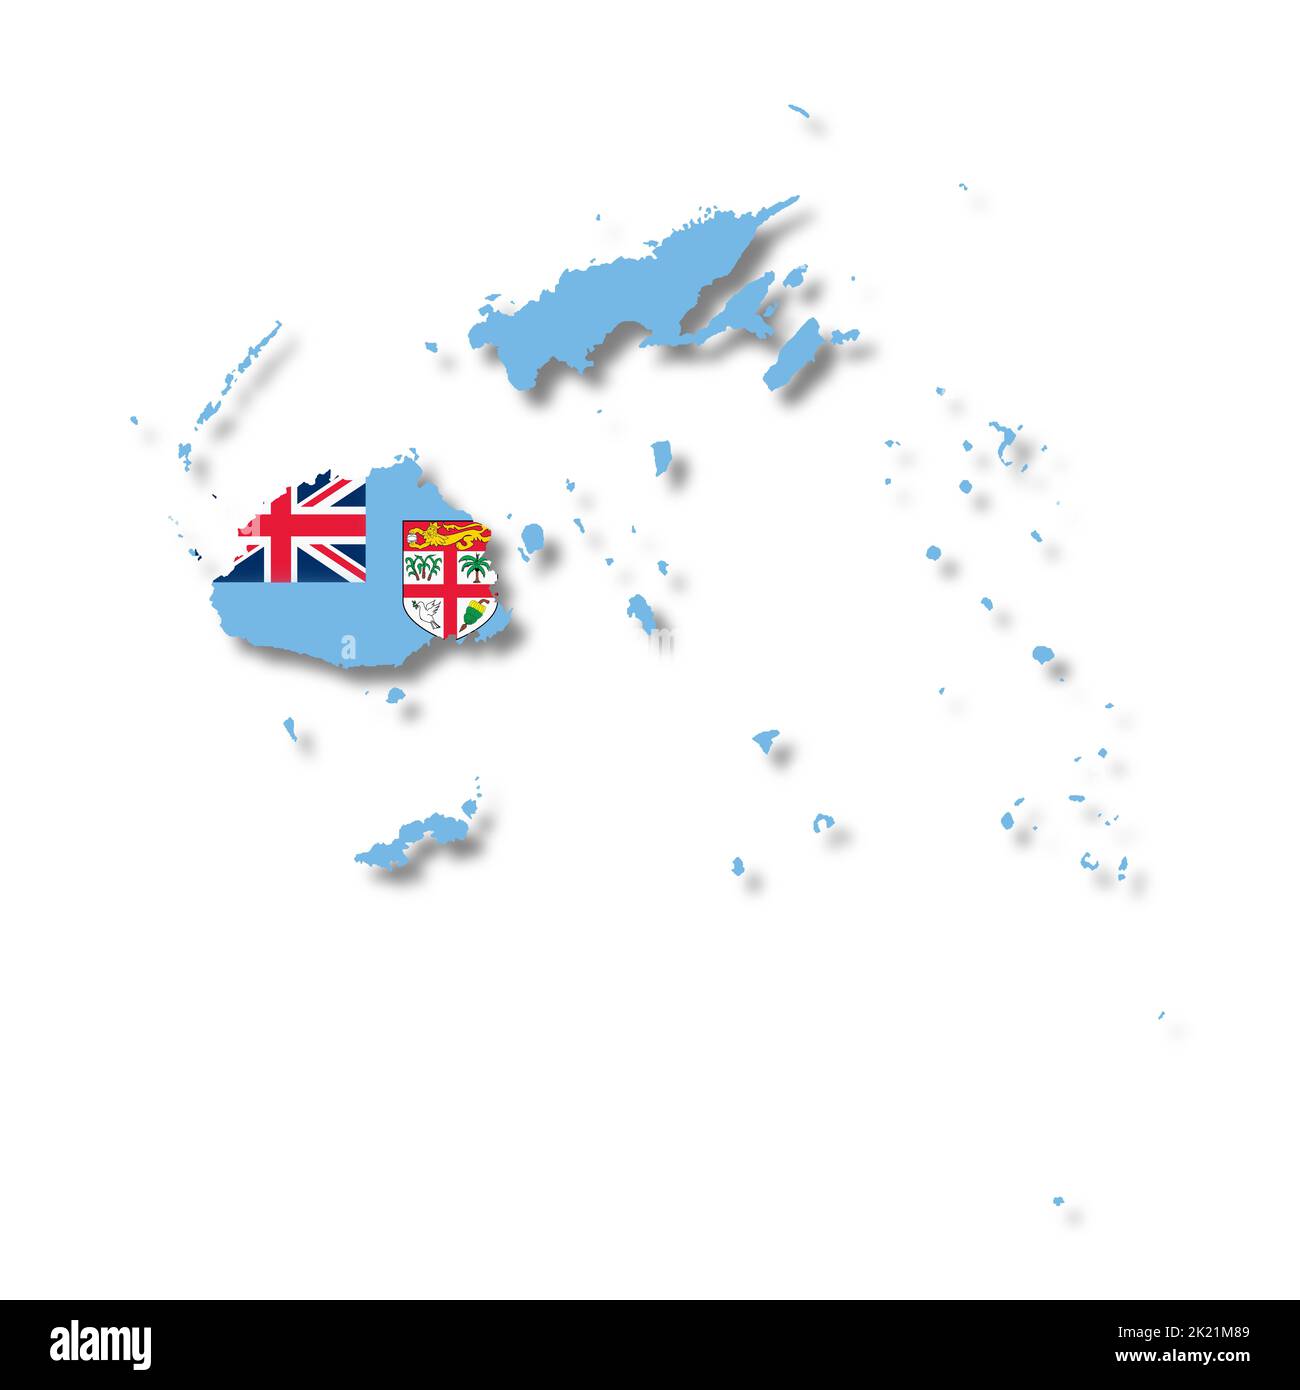 A Fiji map on white background with clipping path to remove shadow 3d illustration Stock Photo